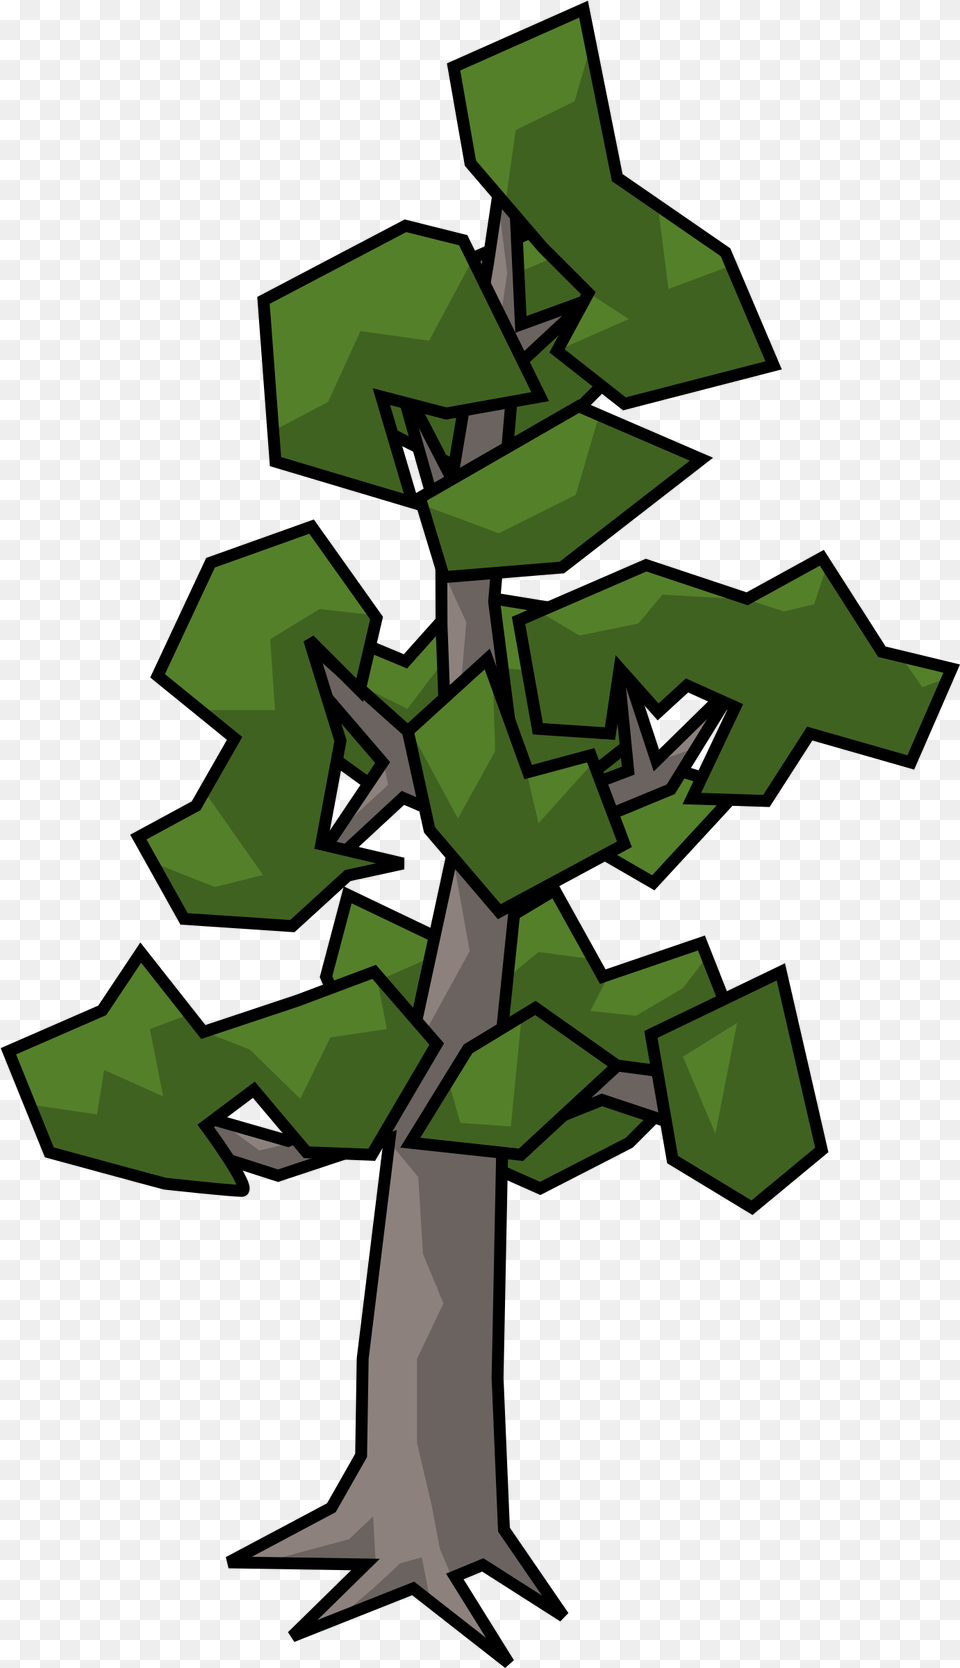 Scots Pine Tree Tree Branch Cell Shading Clipart Full Scots Pine Clip Art, Green, Recycling Symbol, Symbol, Plant Png